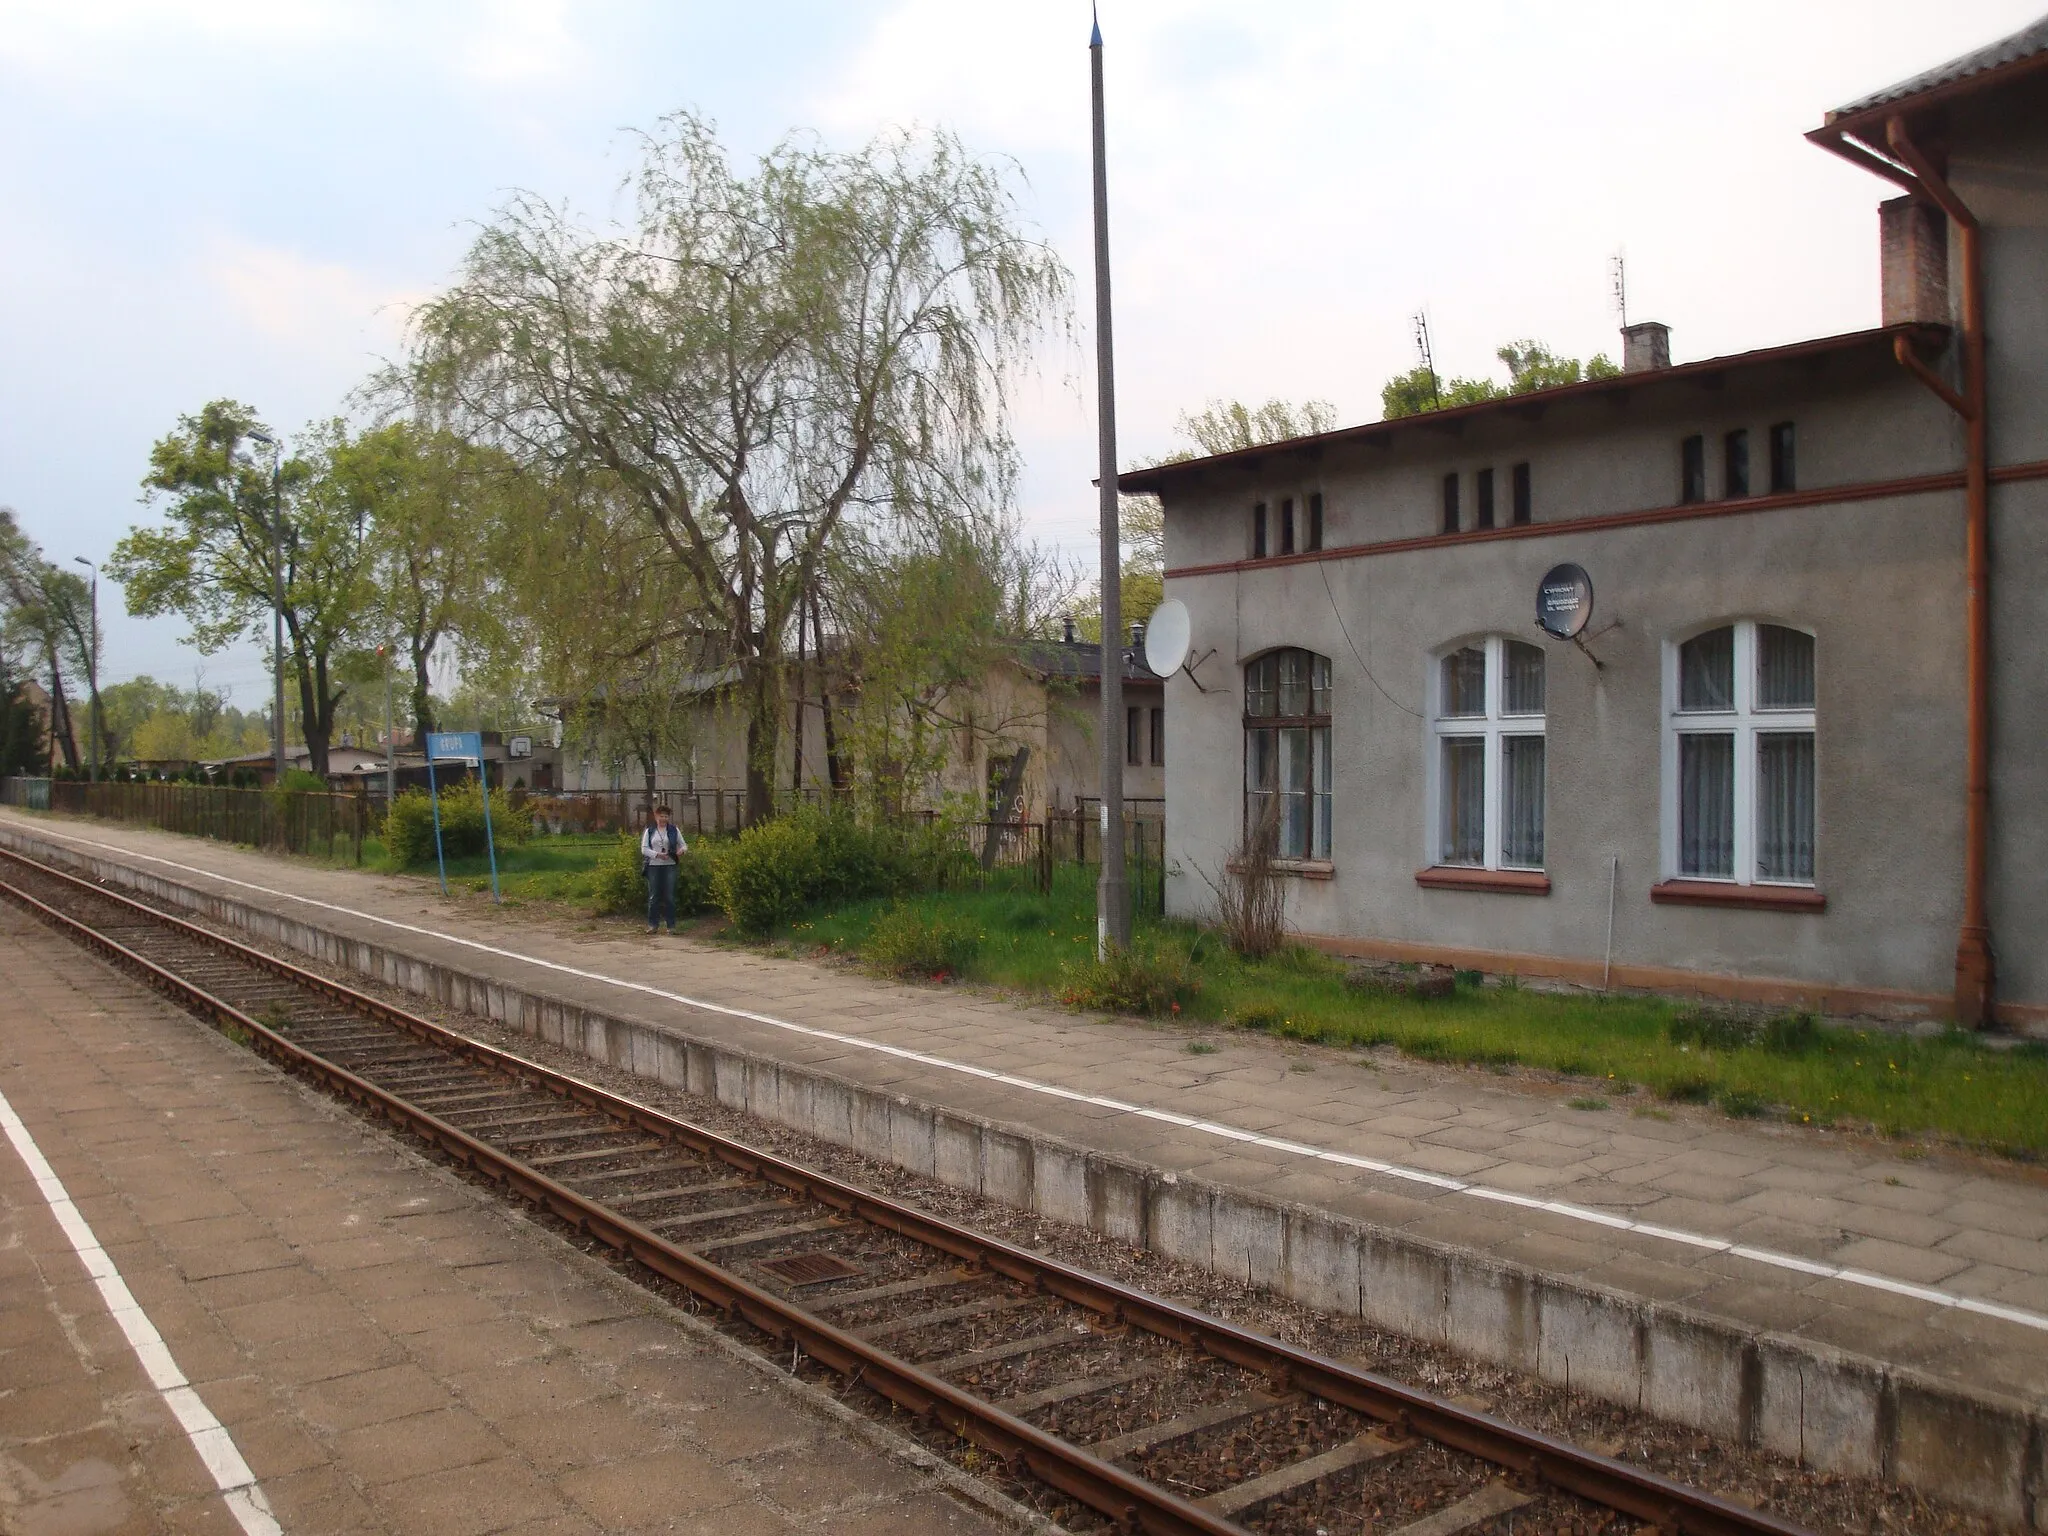 Photo showing: Train station in Grupa, Poland